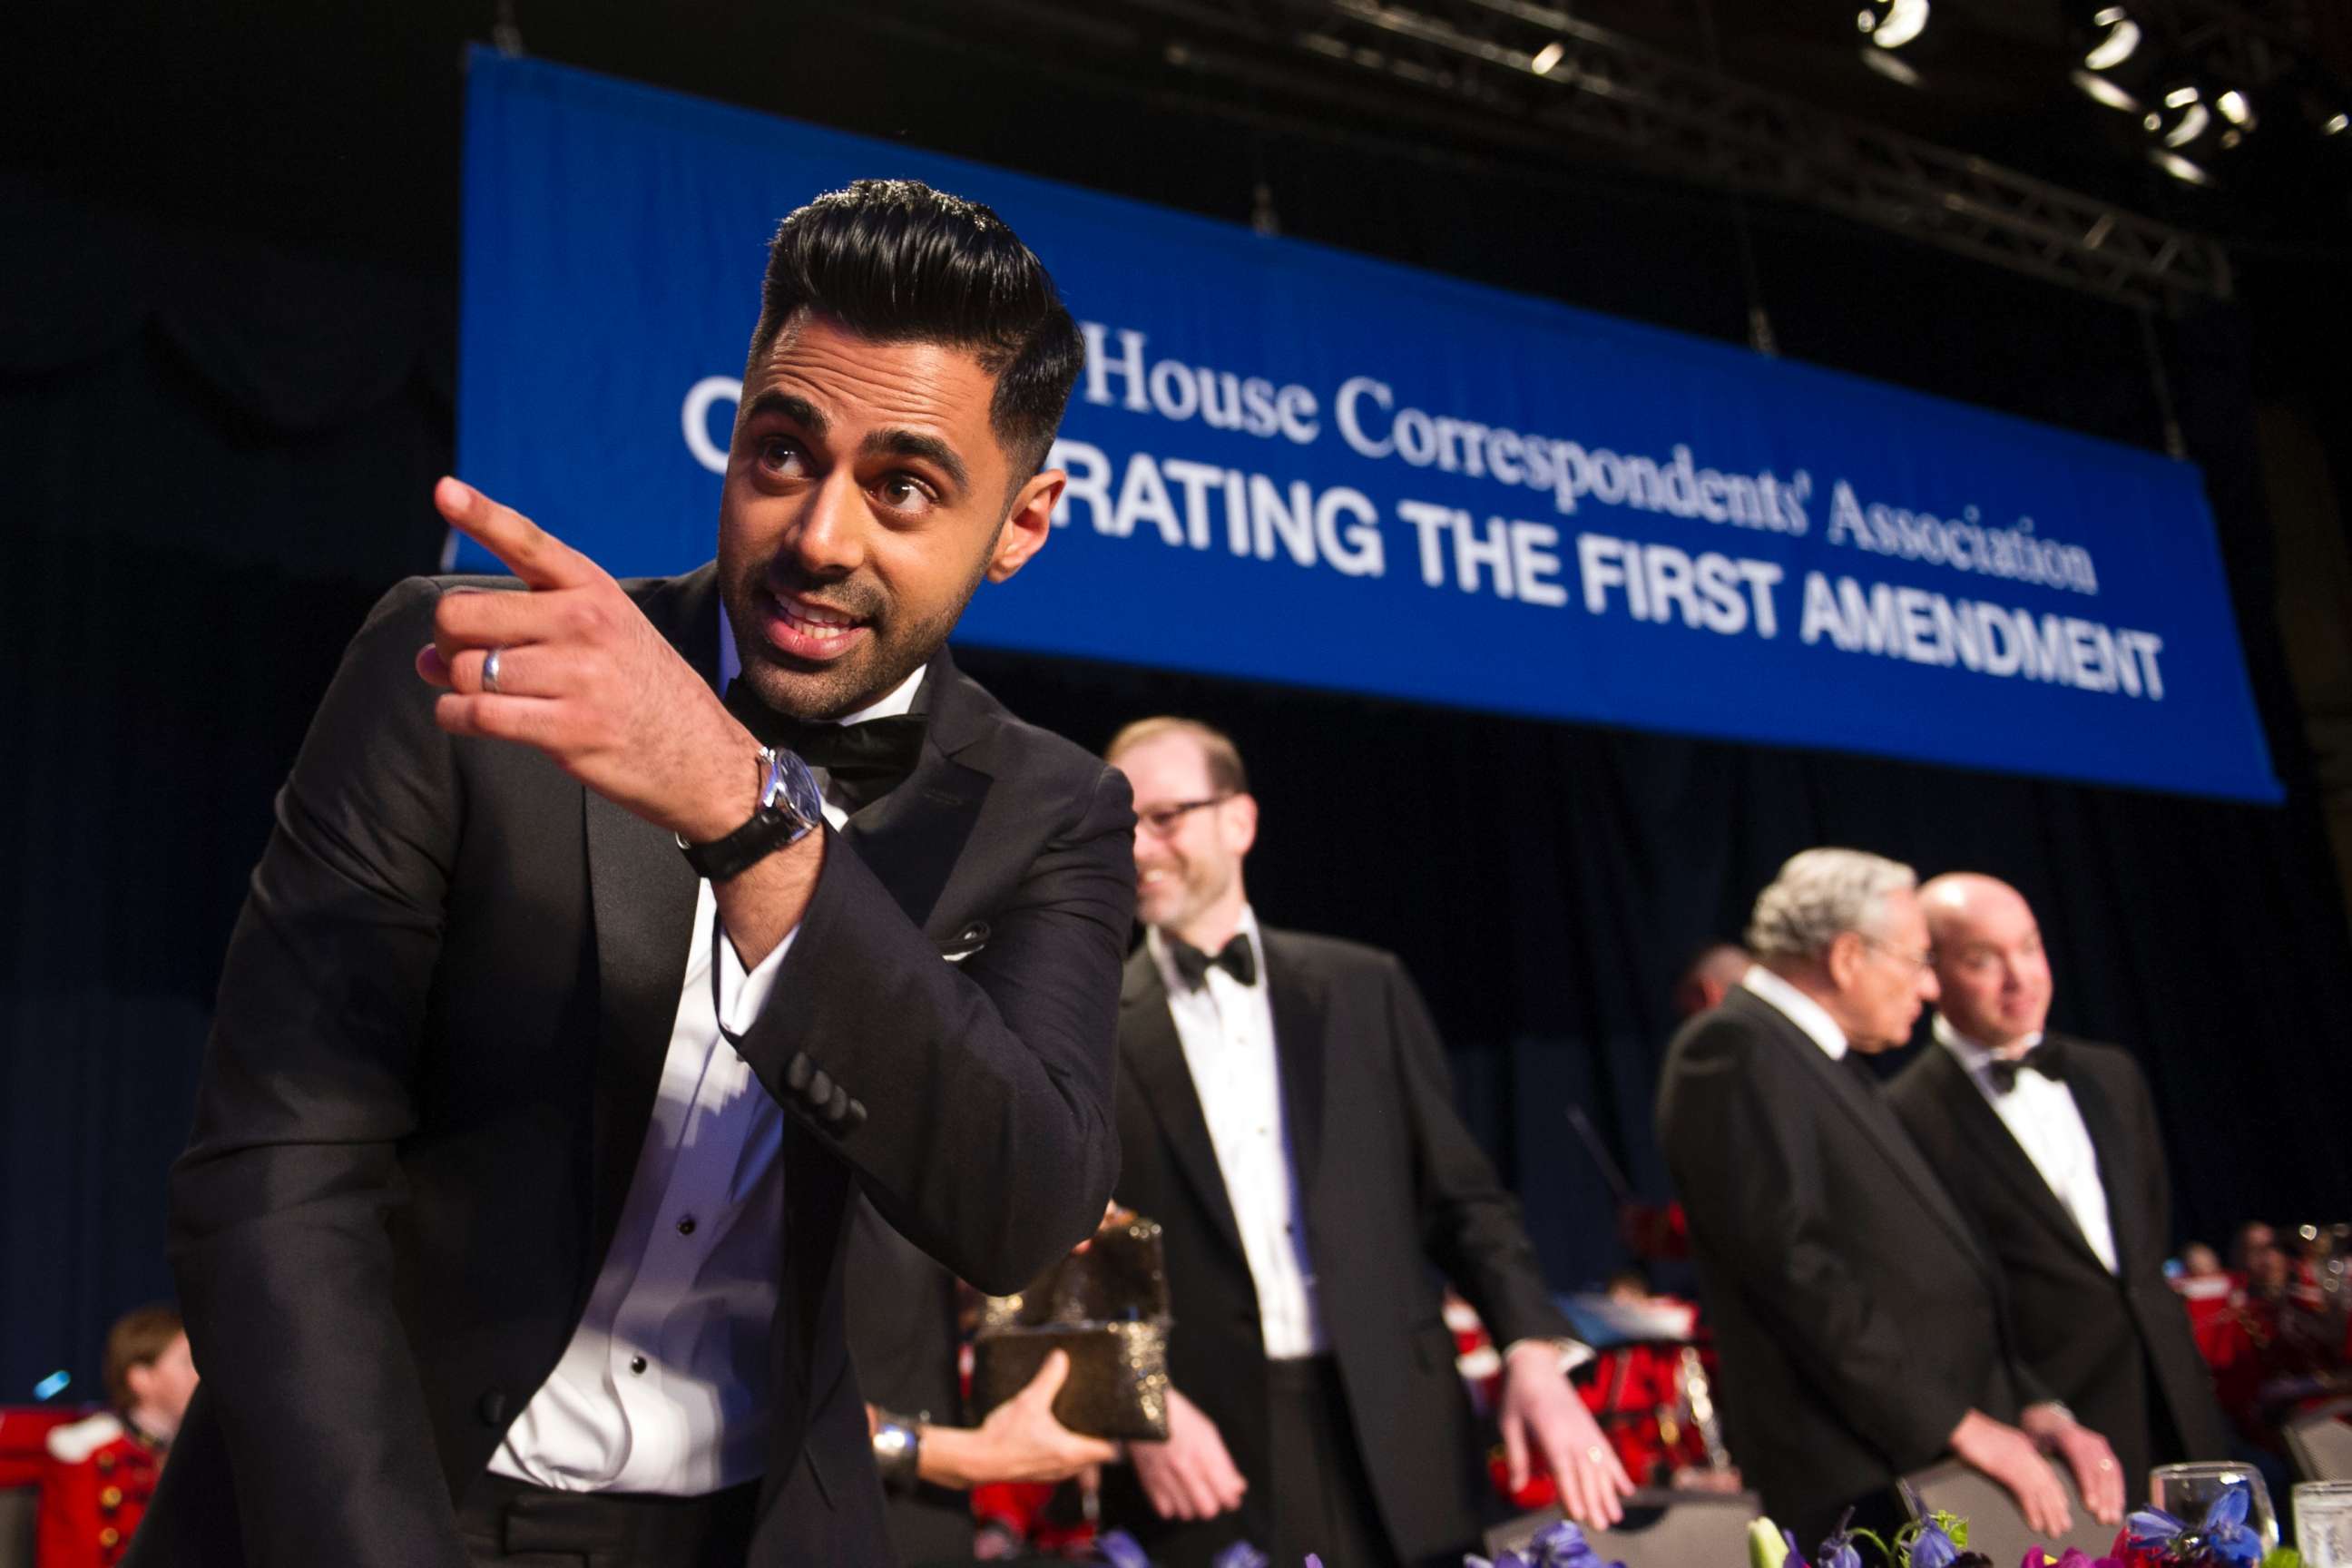 PHOTO: The Daily Show correspondent Hasan Minhaj stands at the head table during the White House Correspondents' Dinner in Washington, D.C., on April 29, 2017.